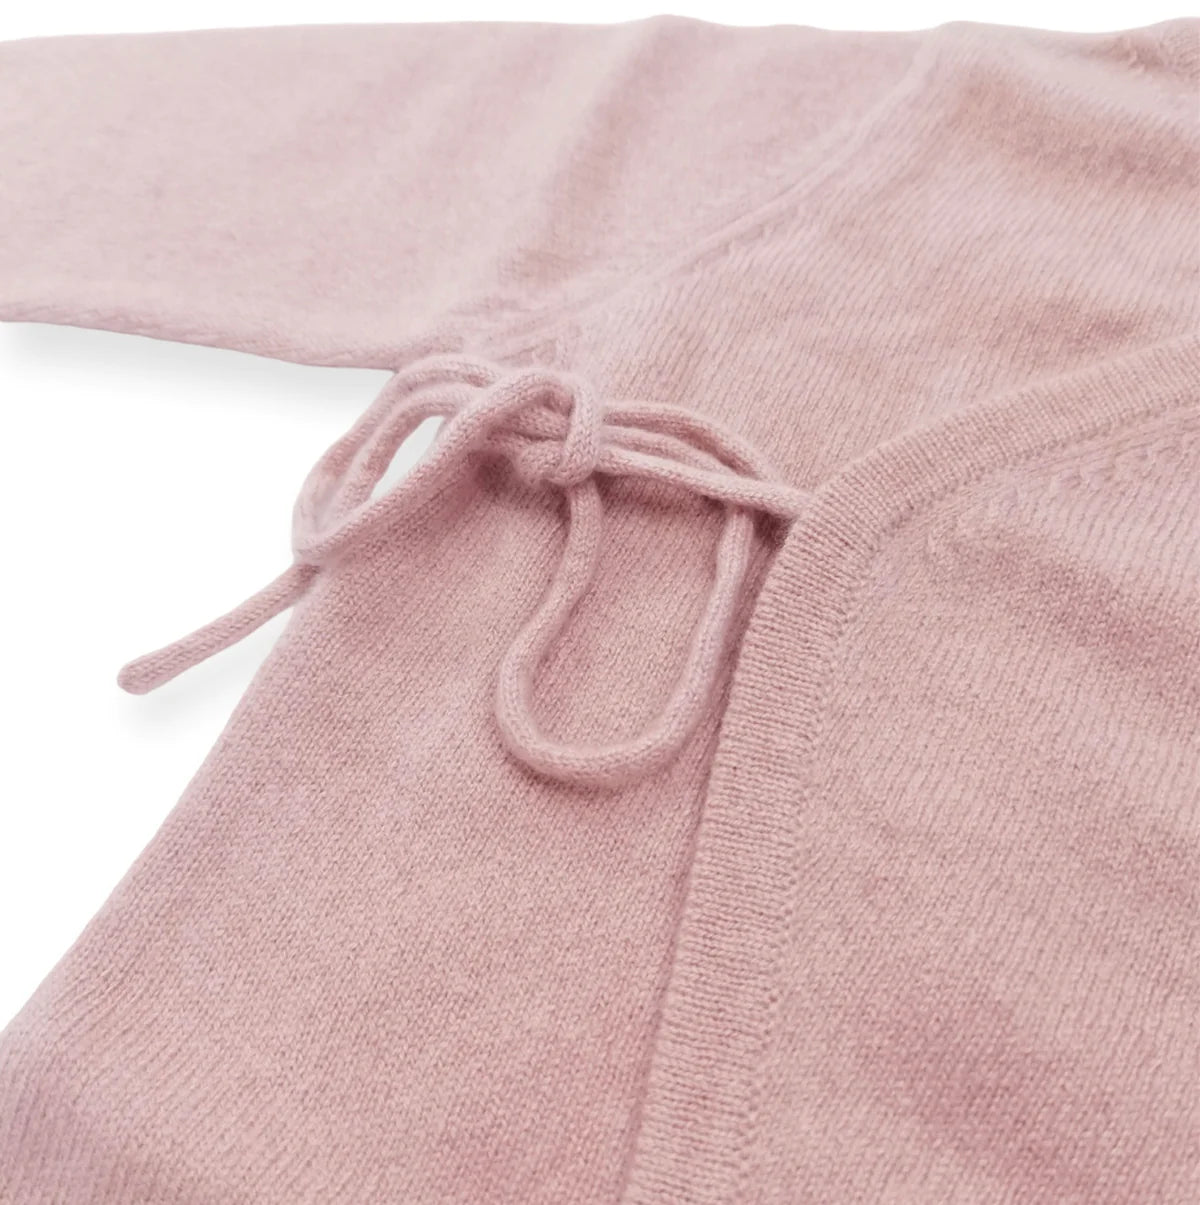 My Little Freckle knit wrap babygrow- pink